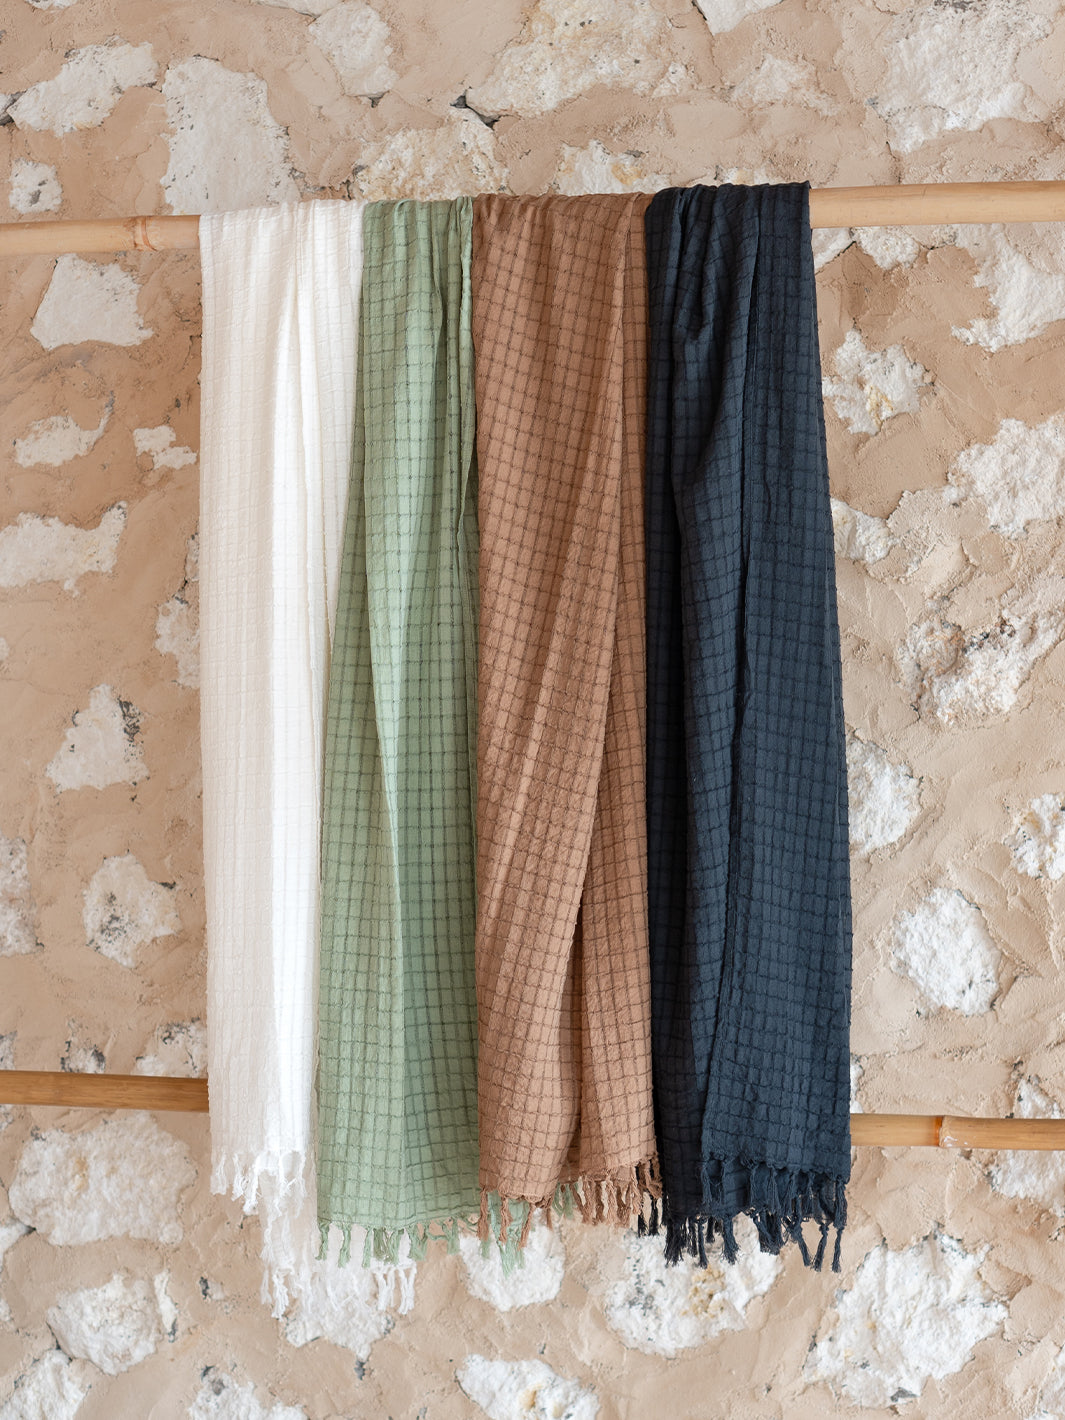 Image features Lugano Cotton Scarf in White, Moss, Desert Sand and Charcoal